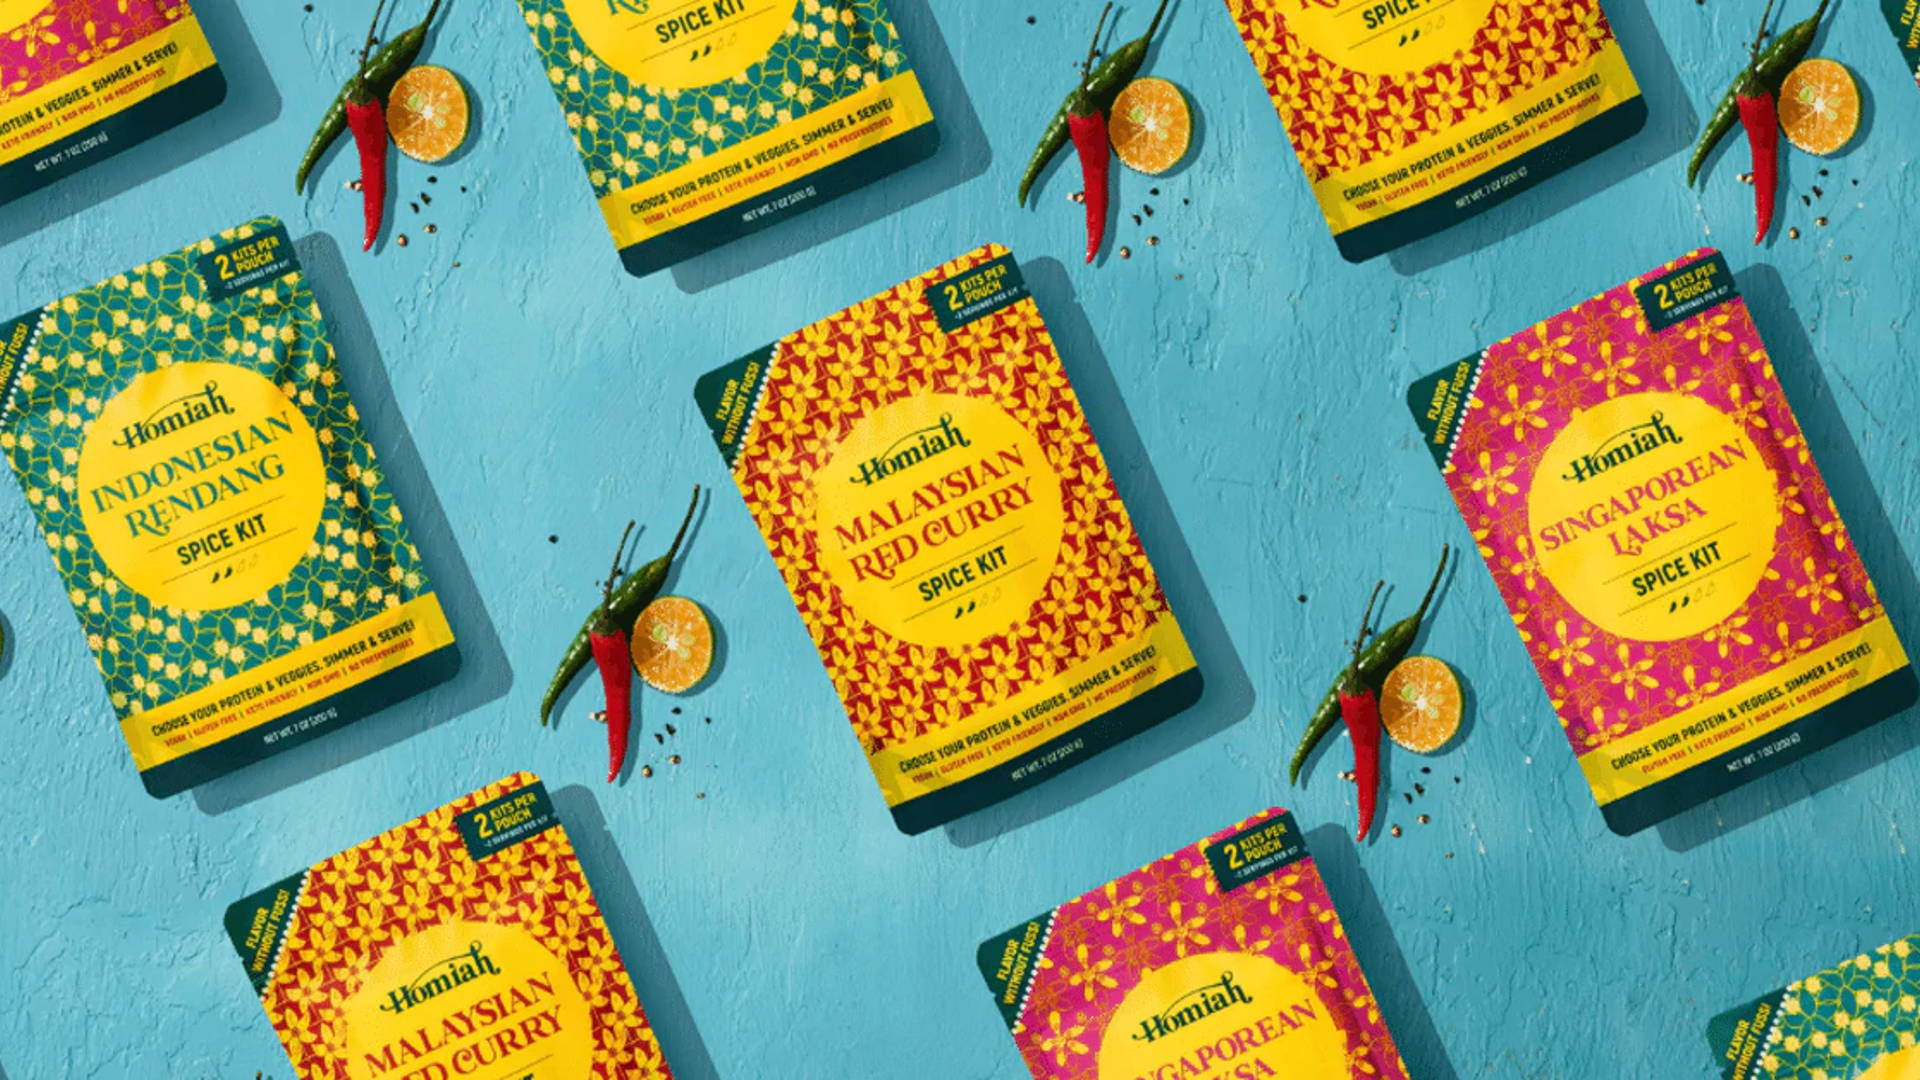 Featured image for Homiah Brings Malaysian Classics To Home Pantries With Vibrant Packaging